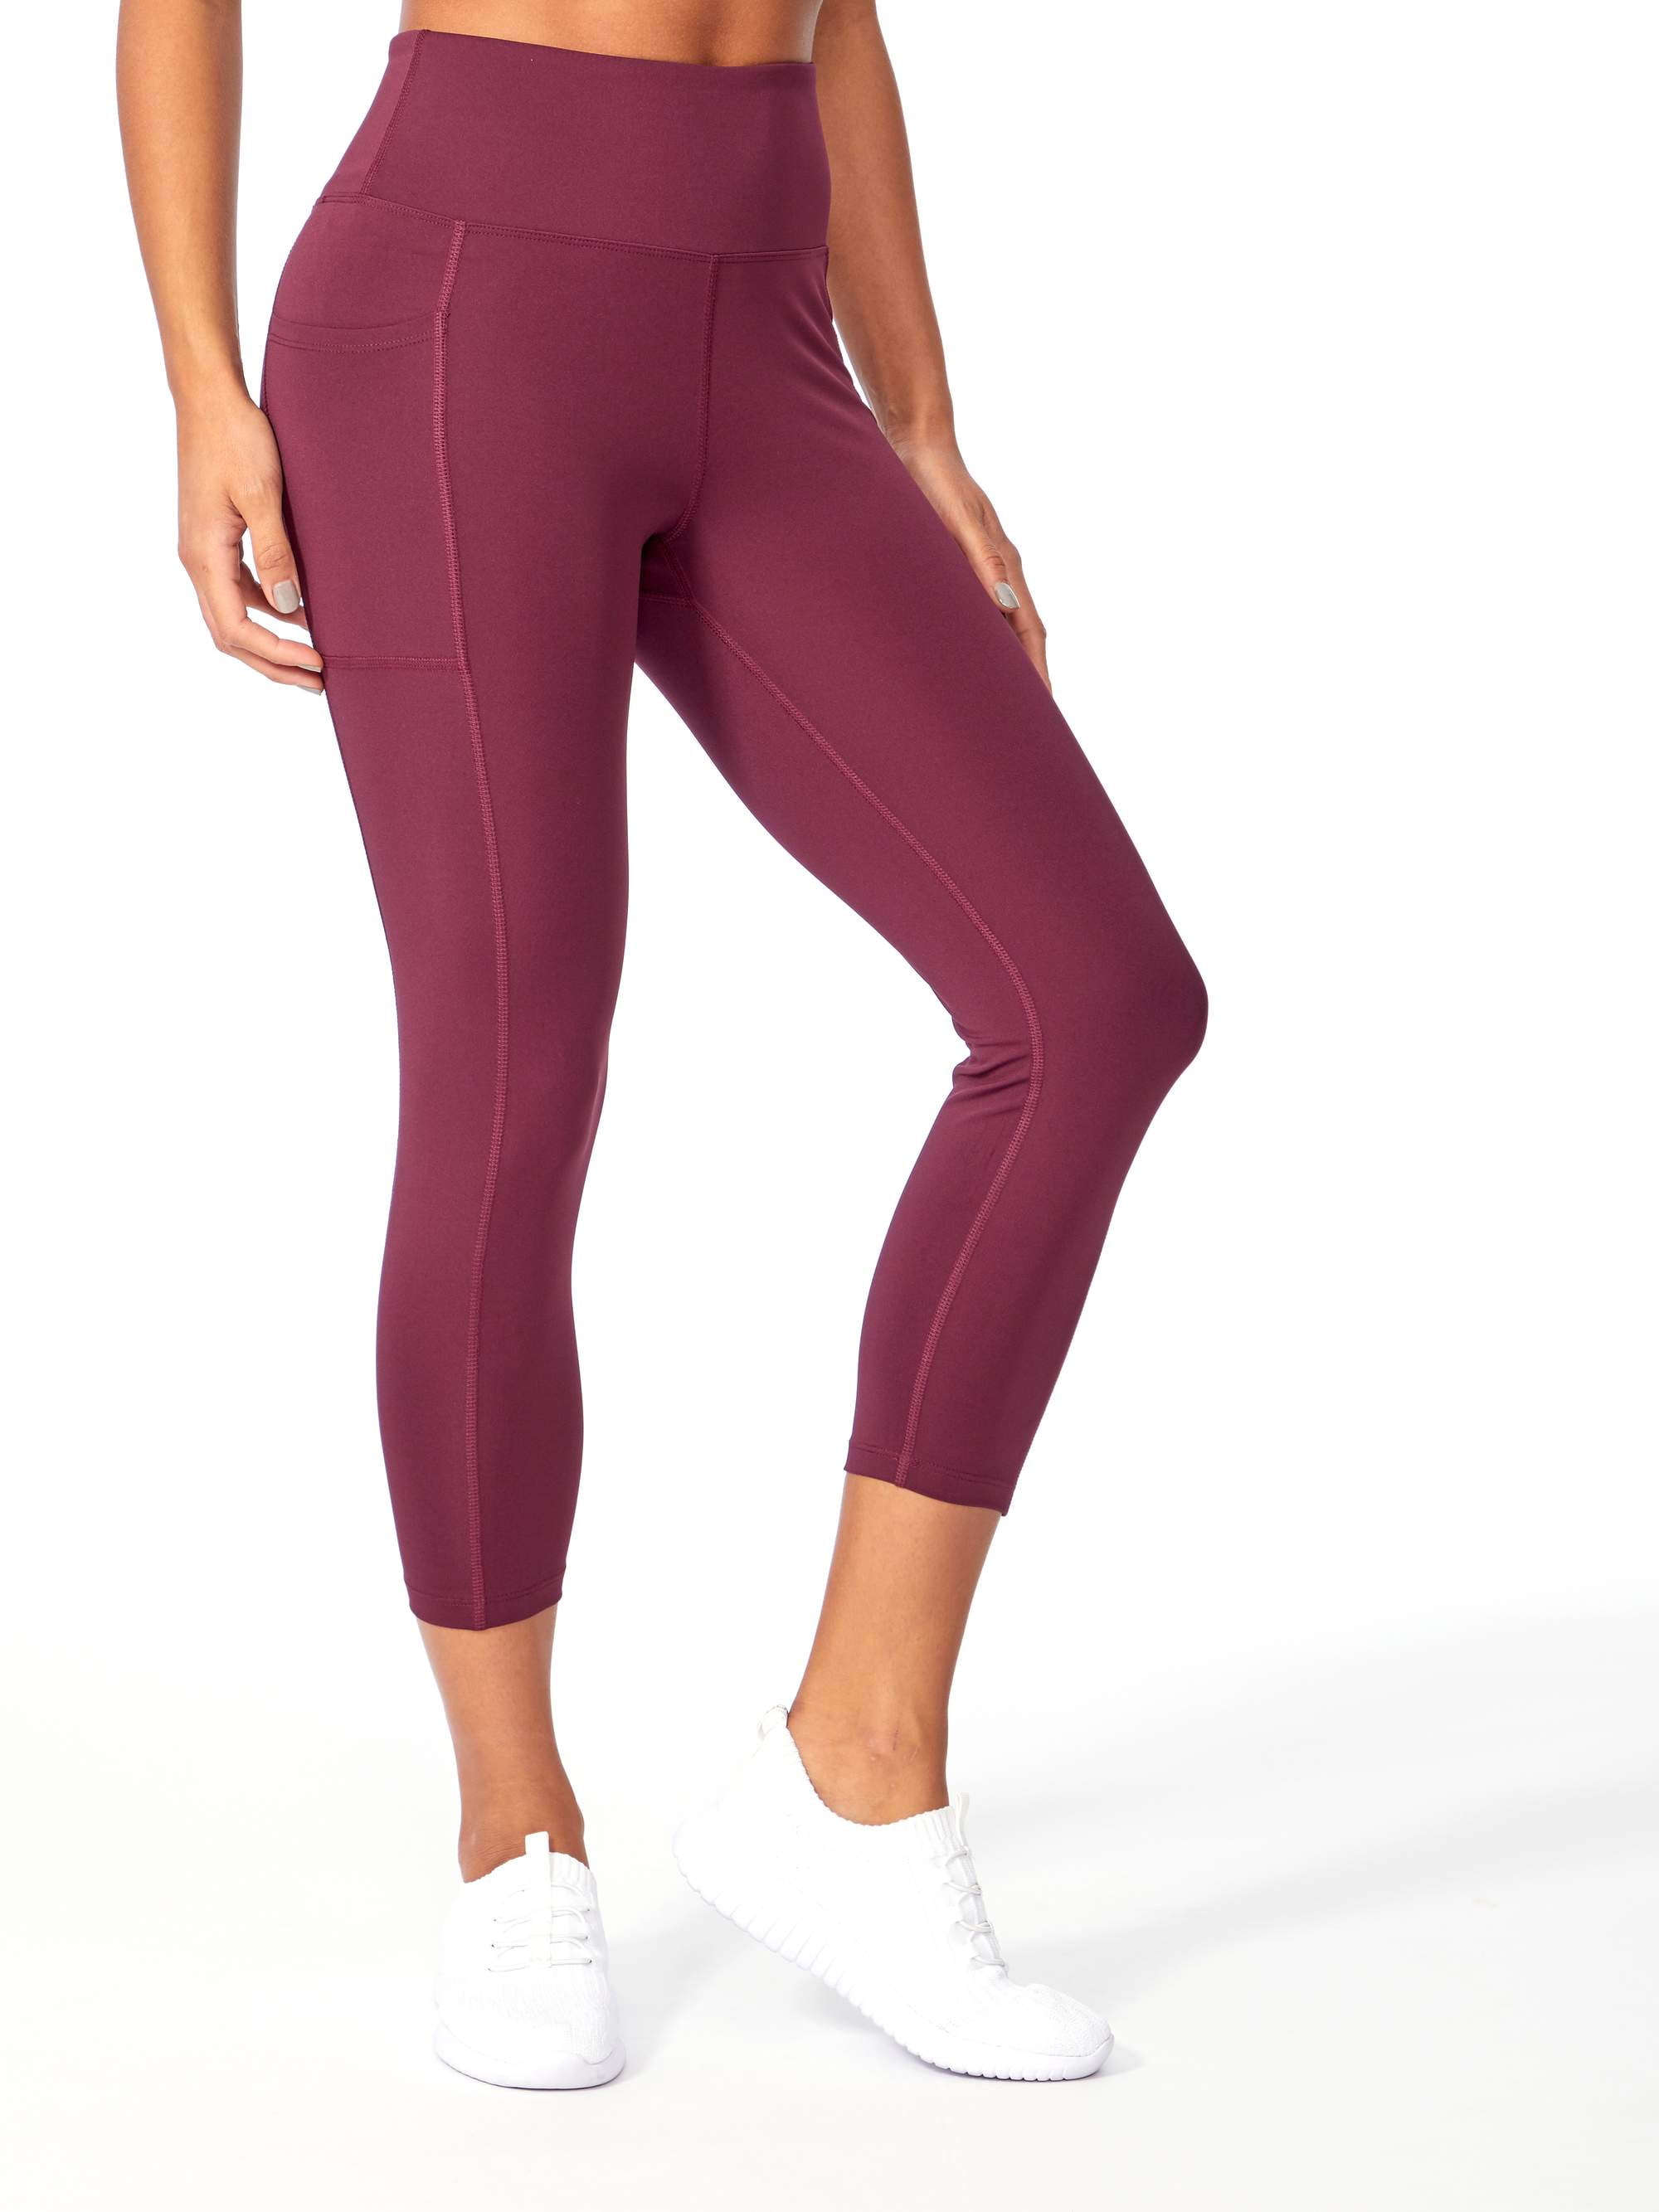 Bally Total Fitness Active Core High Rise Capri Leggings, Walmart's Workout  Clothes Are Next-Level Cute and Seriously Affordable